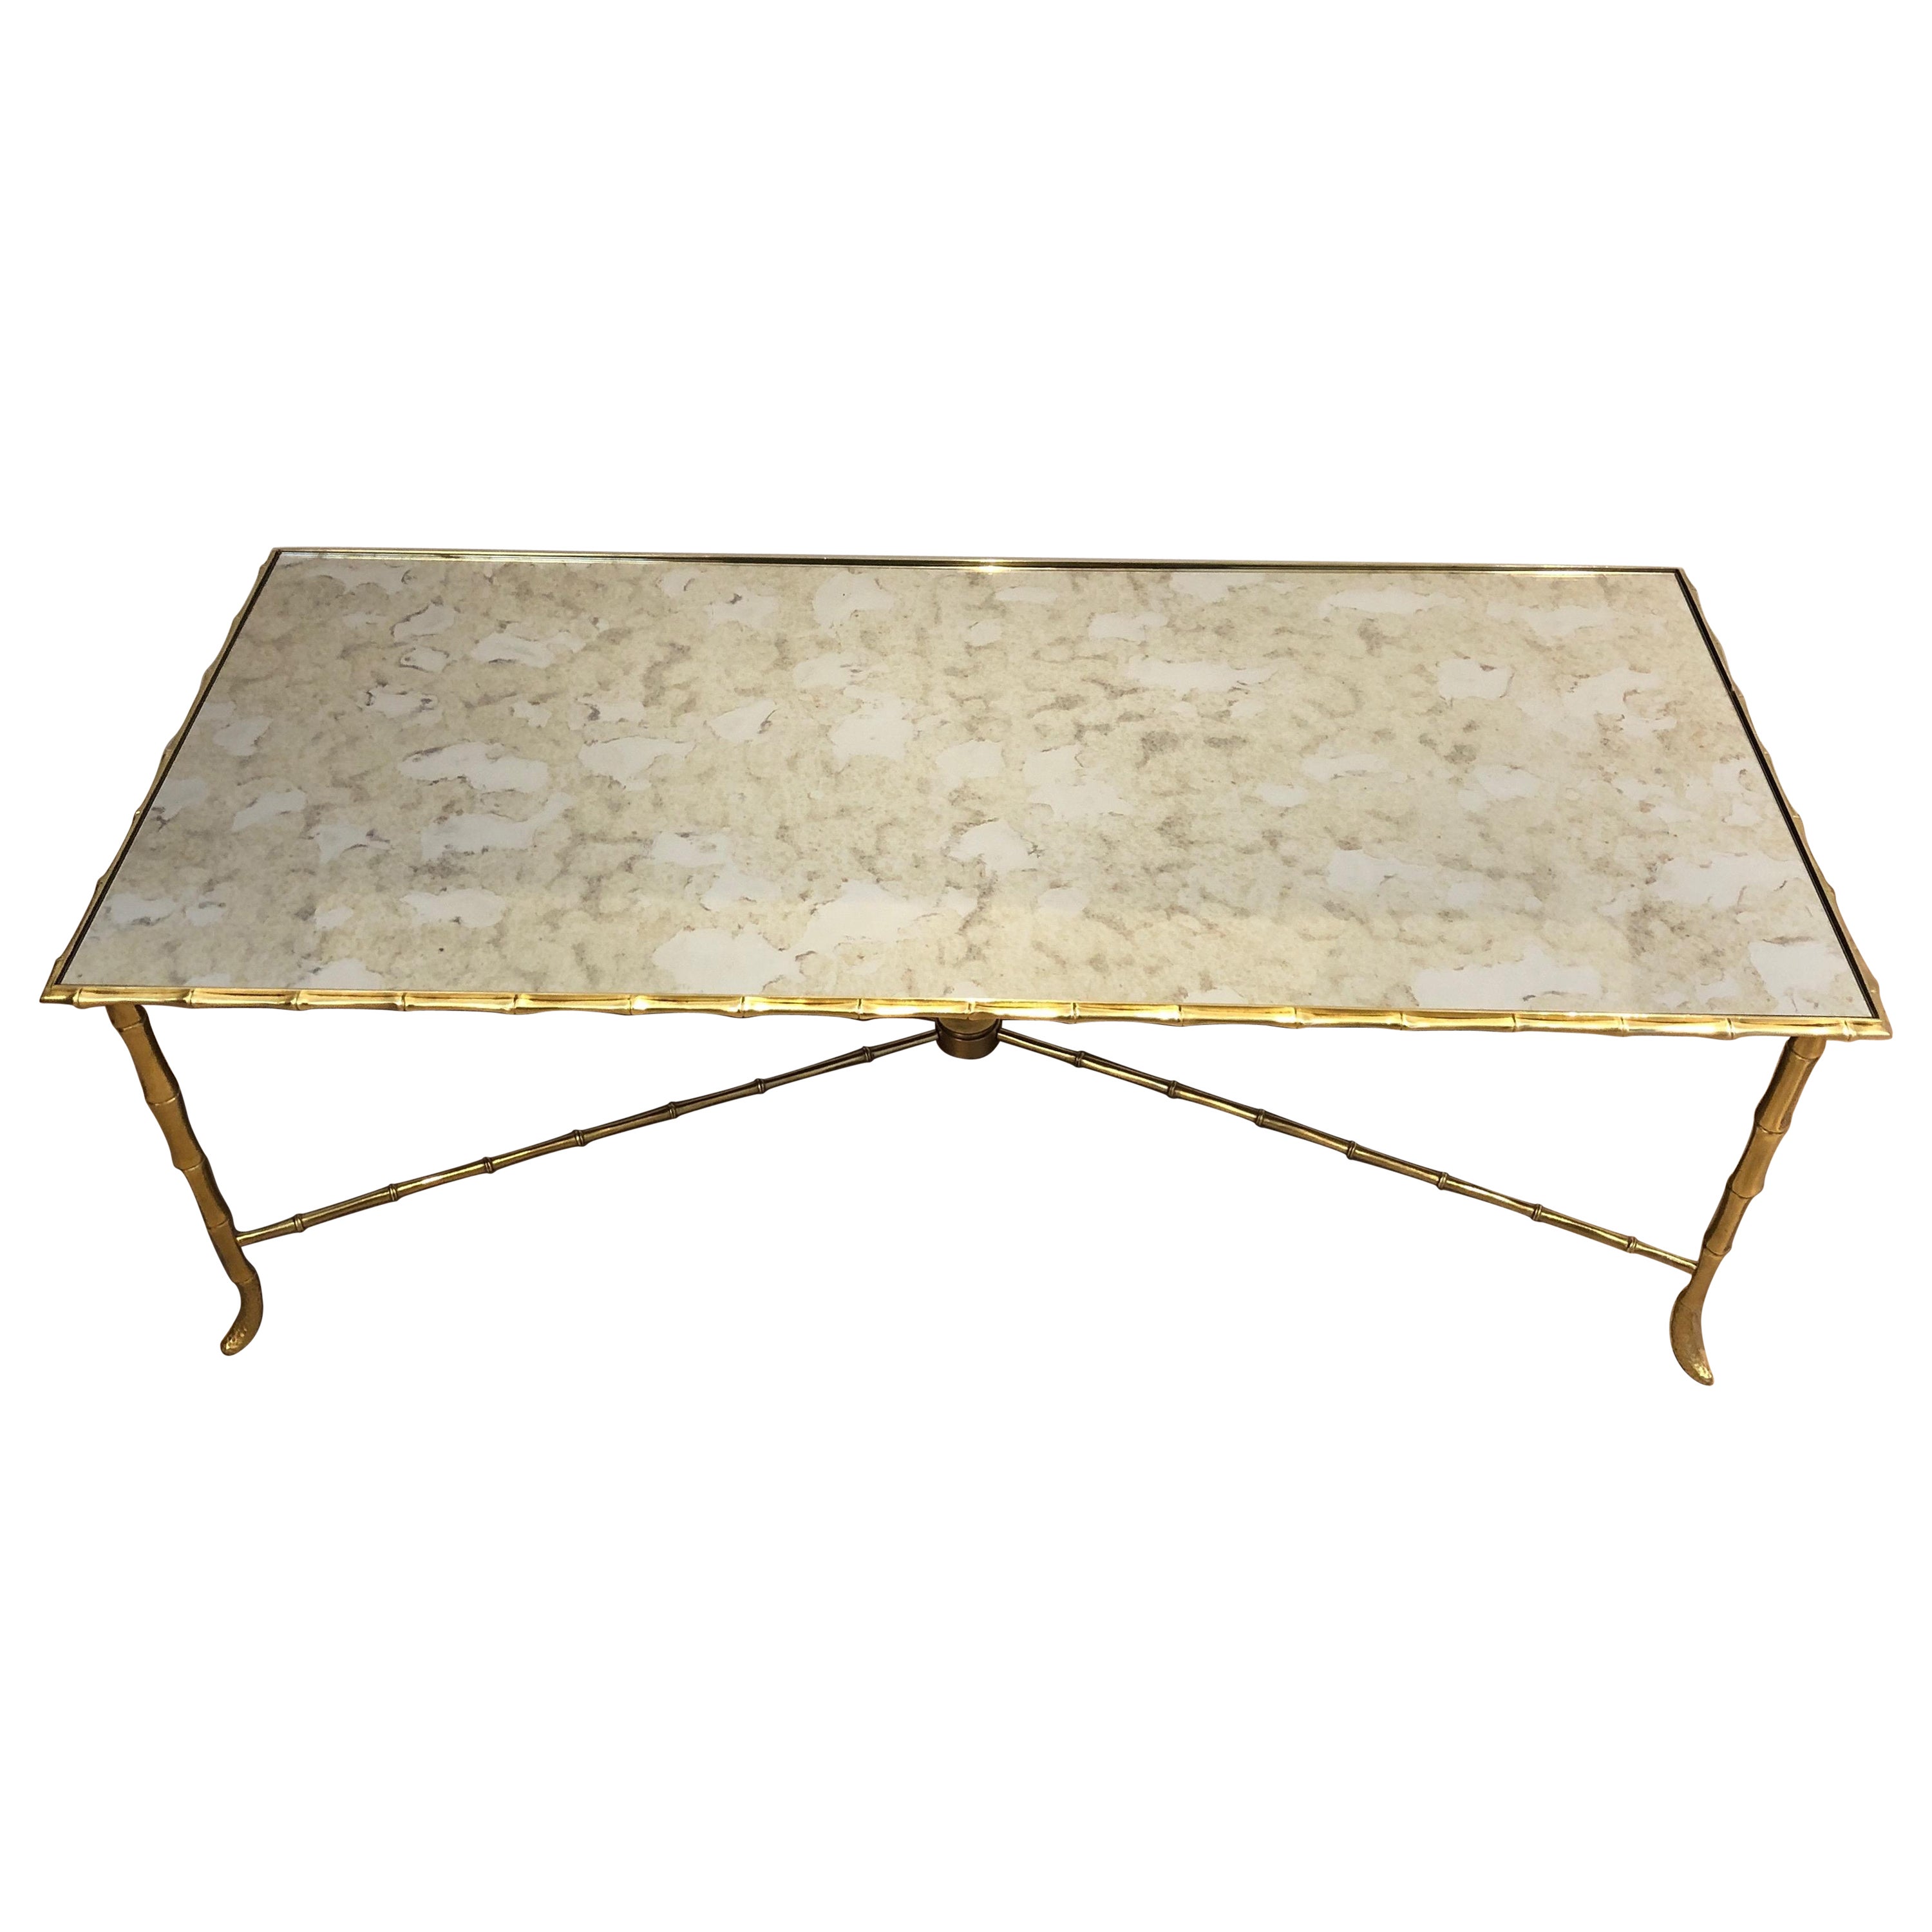 Neoclassical Faux-Bamboo Brass Coffee Table by Maison Baguès